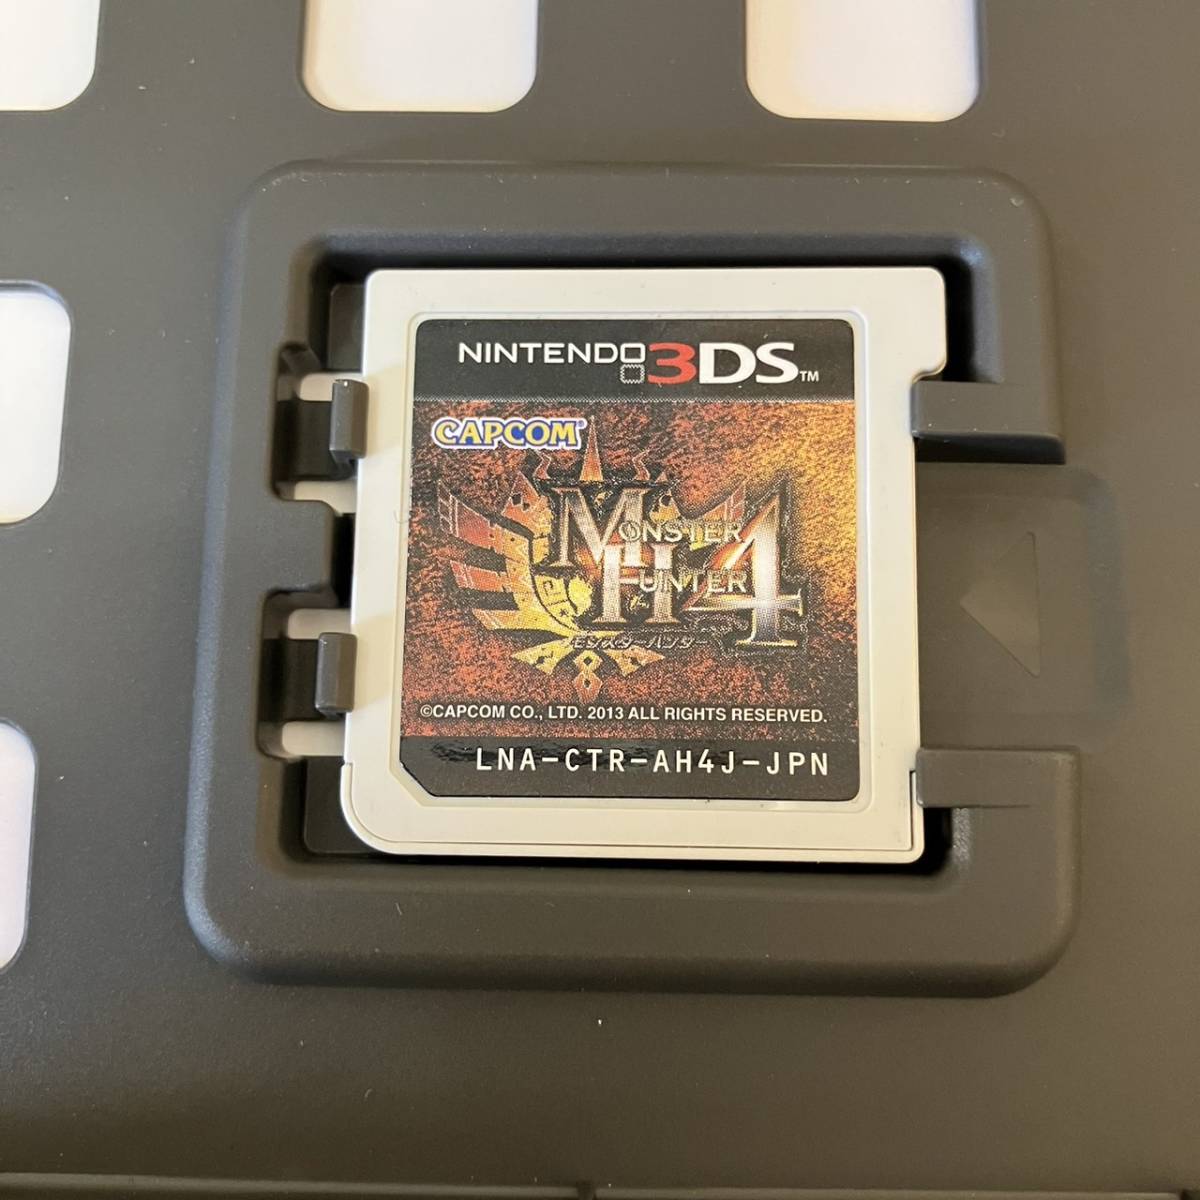 [1-74]Nintendo DS 3DS カセット　ソフト　ゲーム　レトロ　22点　セット　まとめ売り【宅急便コンパクト】_画像3